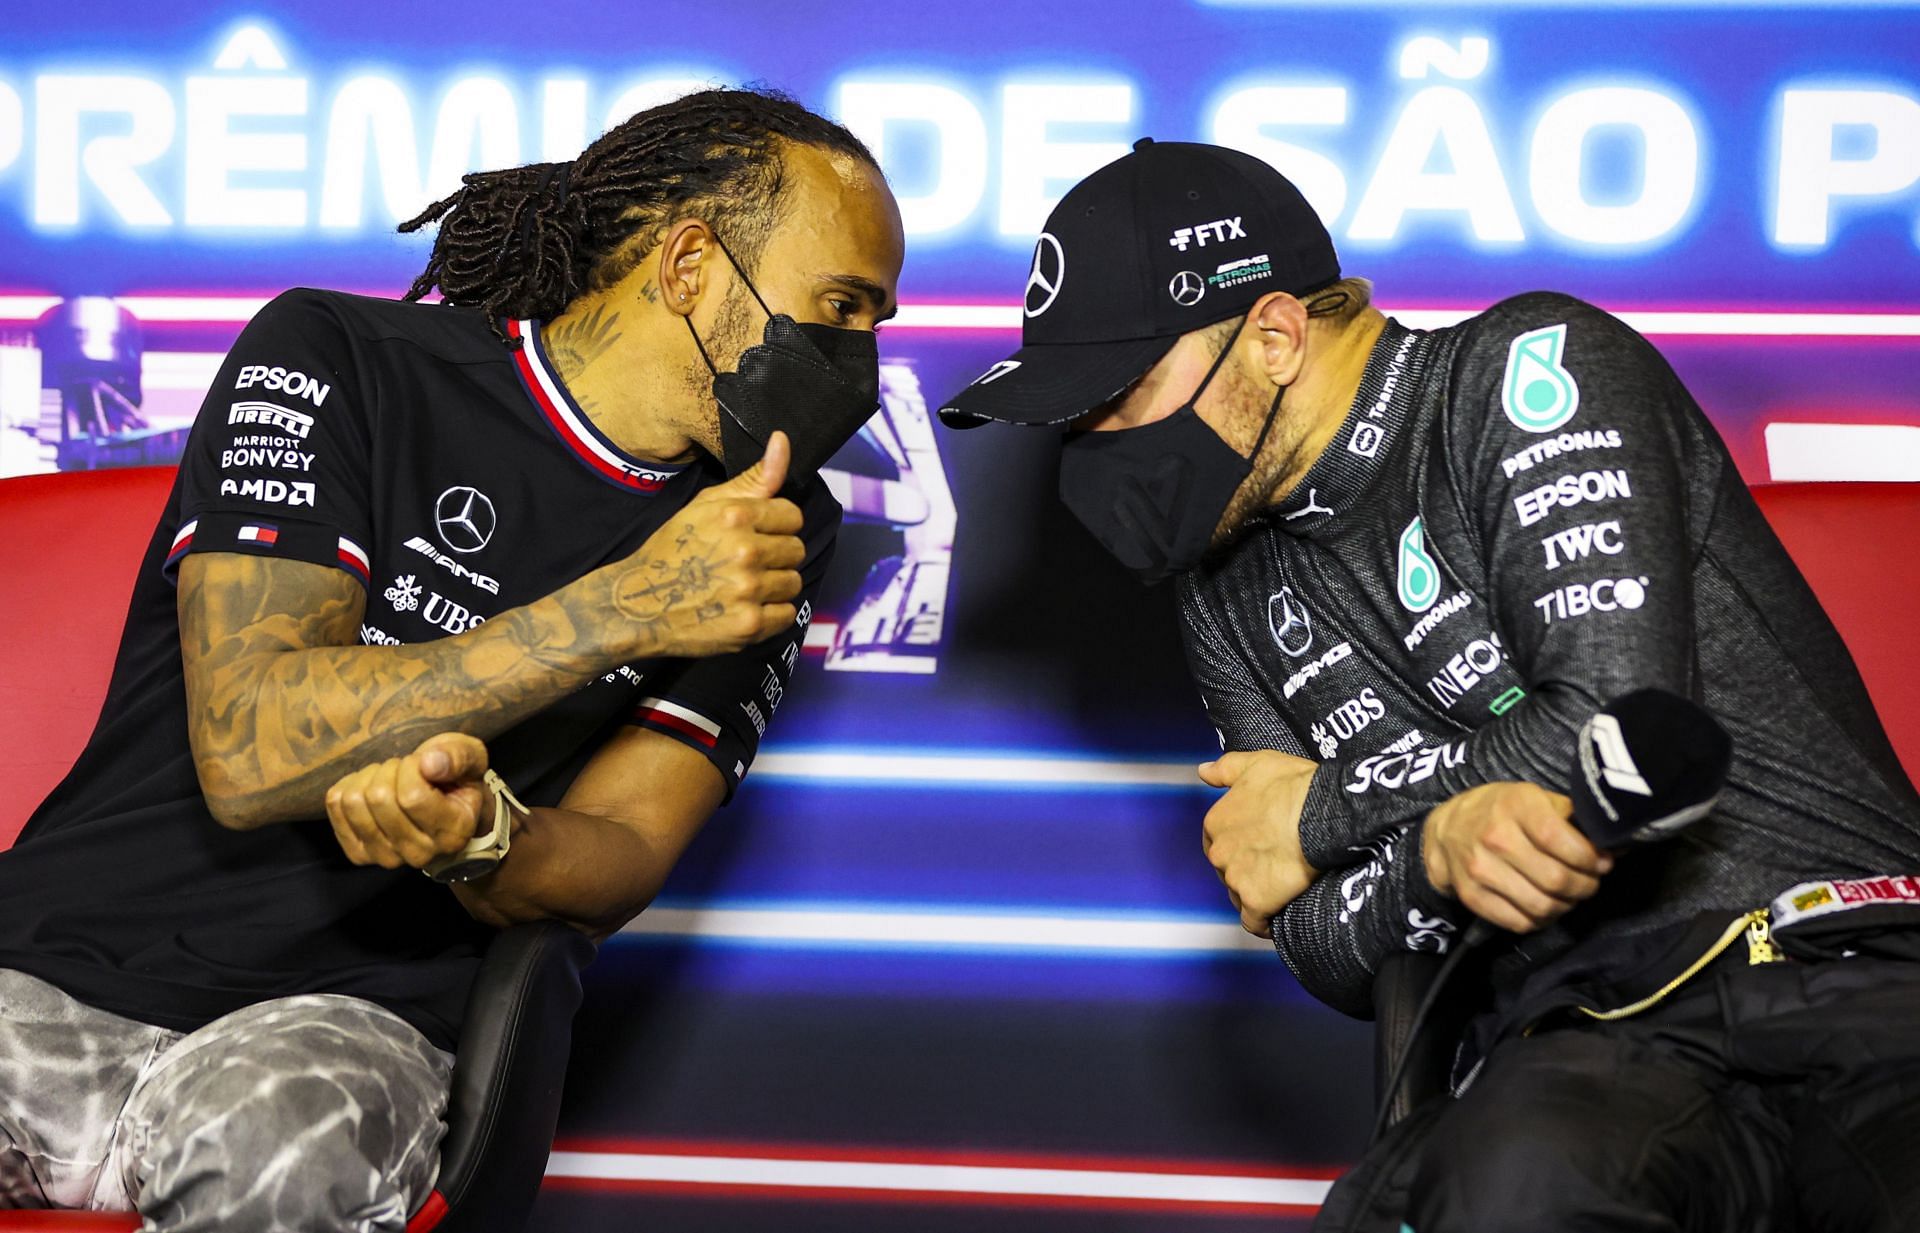 Lewis Hamilton and Valtteri Bottas in a press conference. (Photo by Buda Mendes/Getty Images)